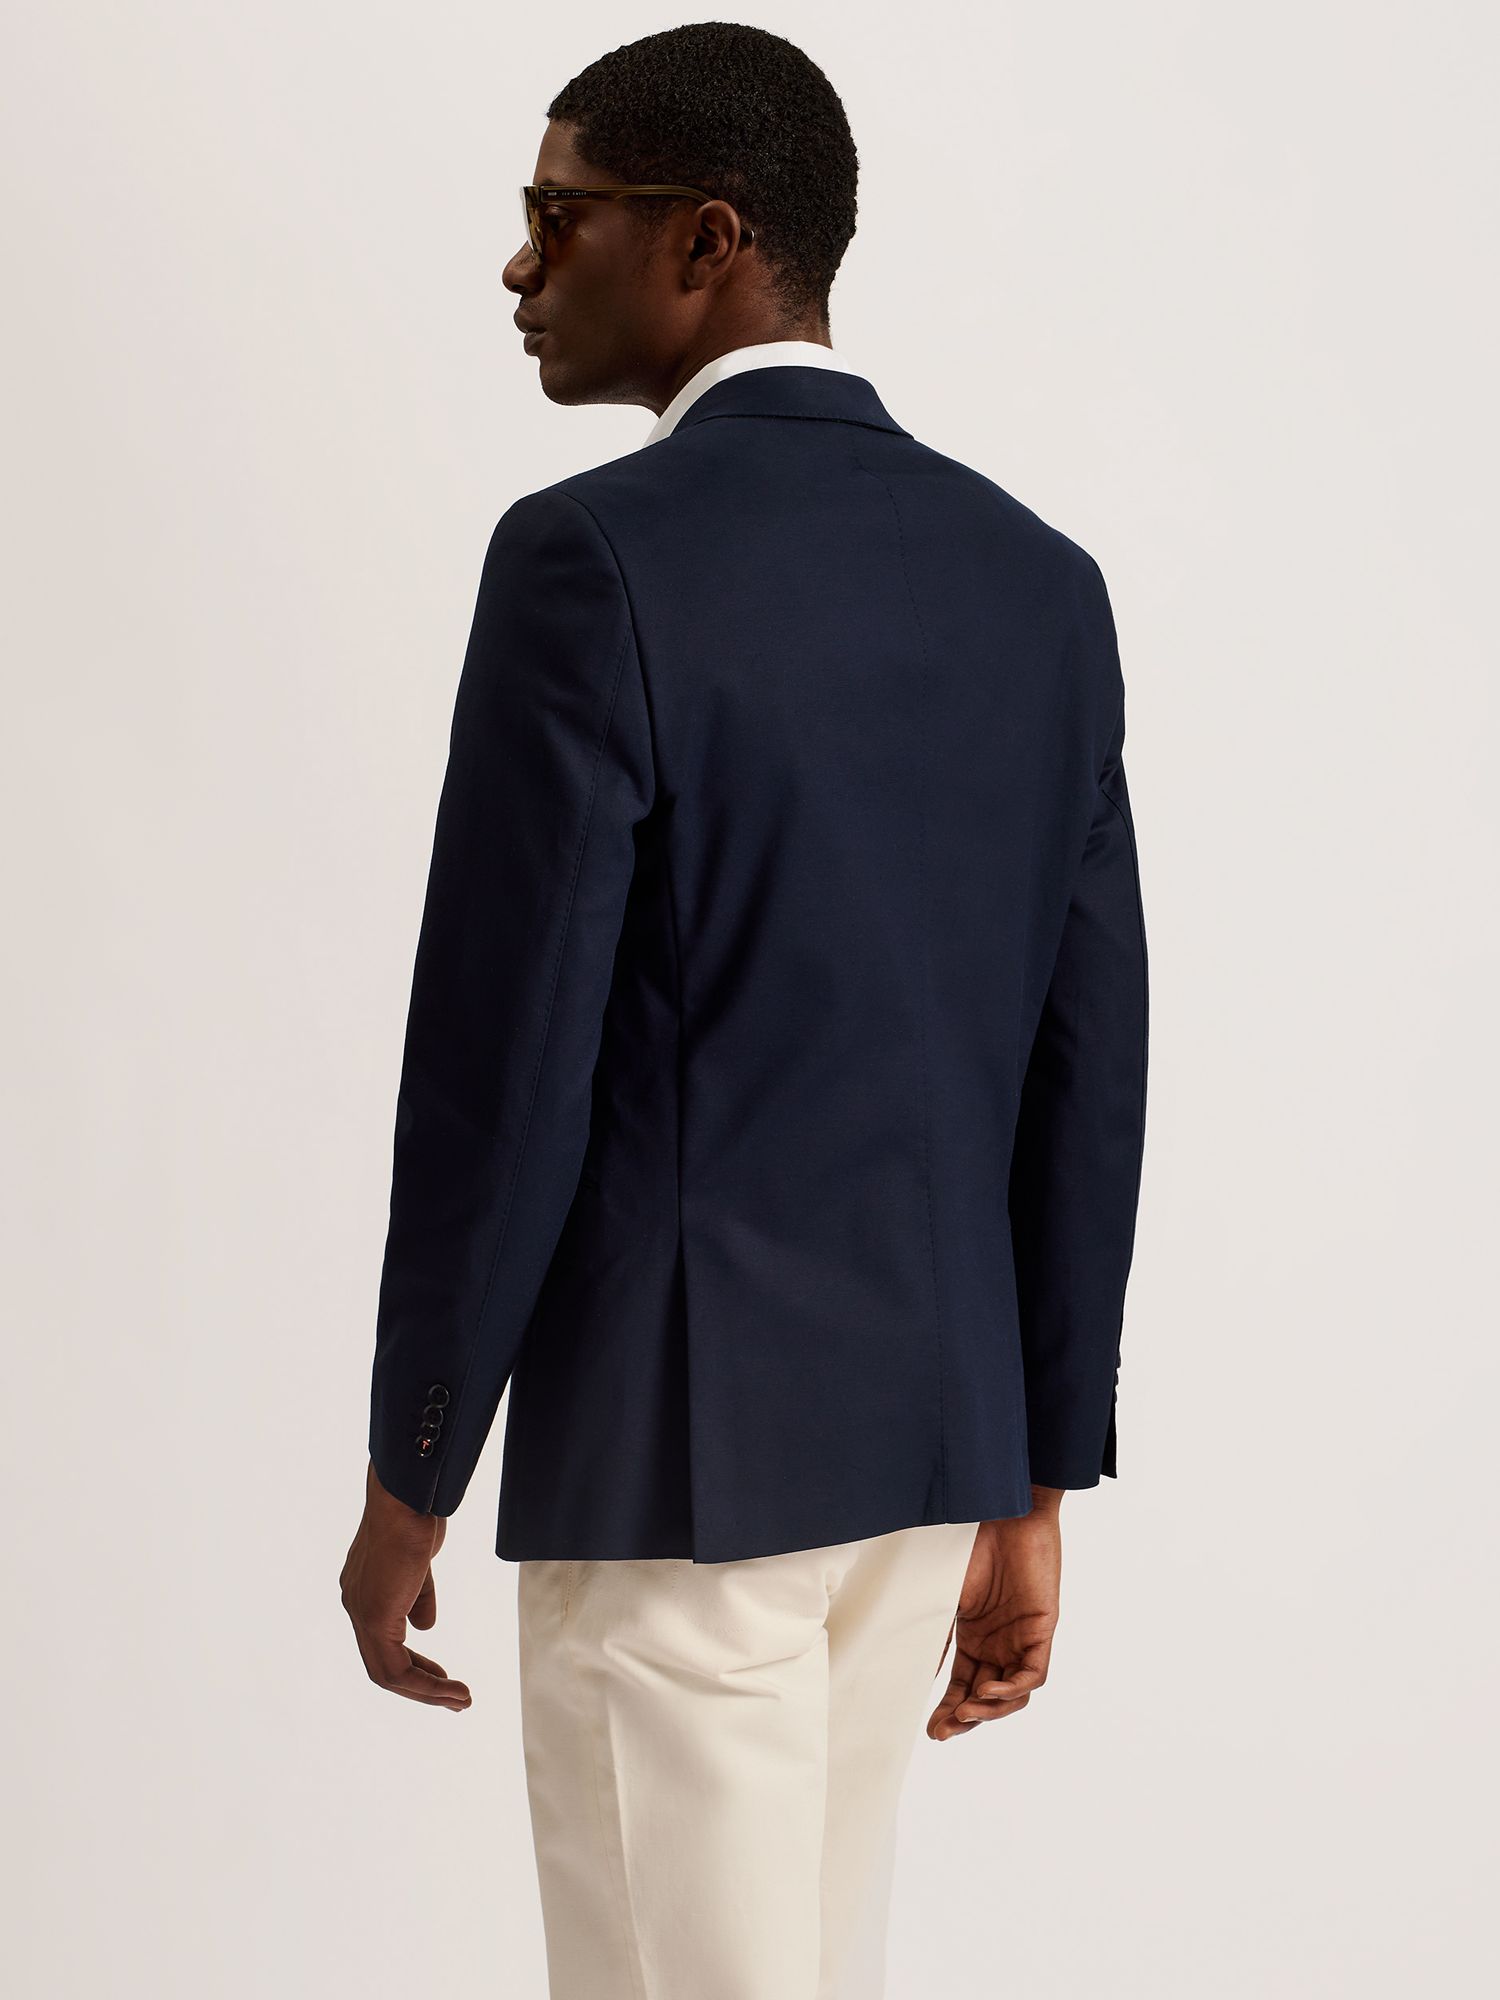 Ted Baker Compact Cotton Blazer, Navy, M